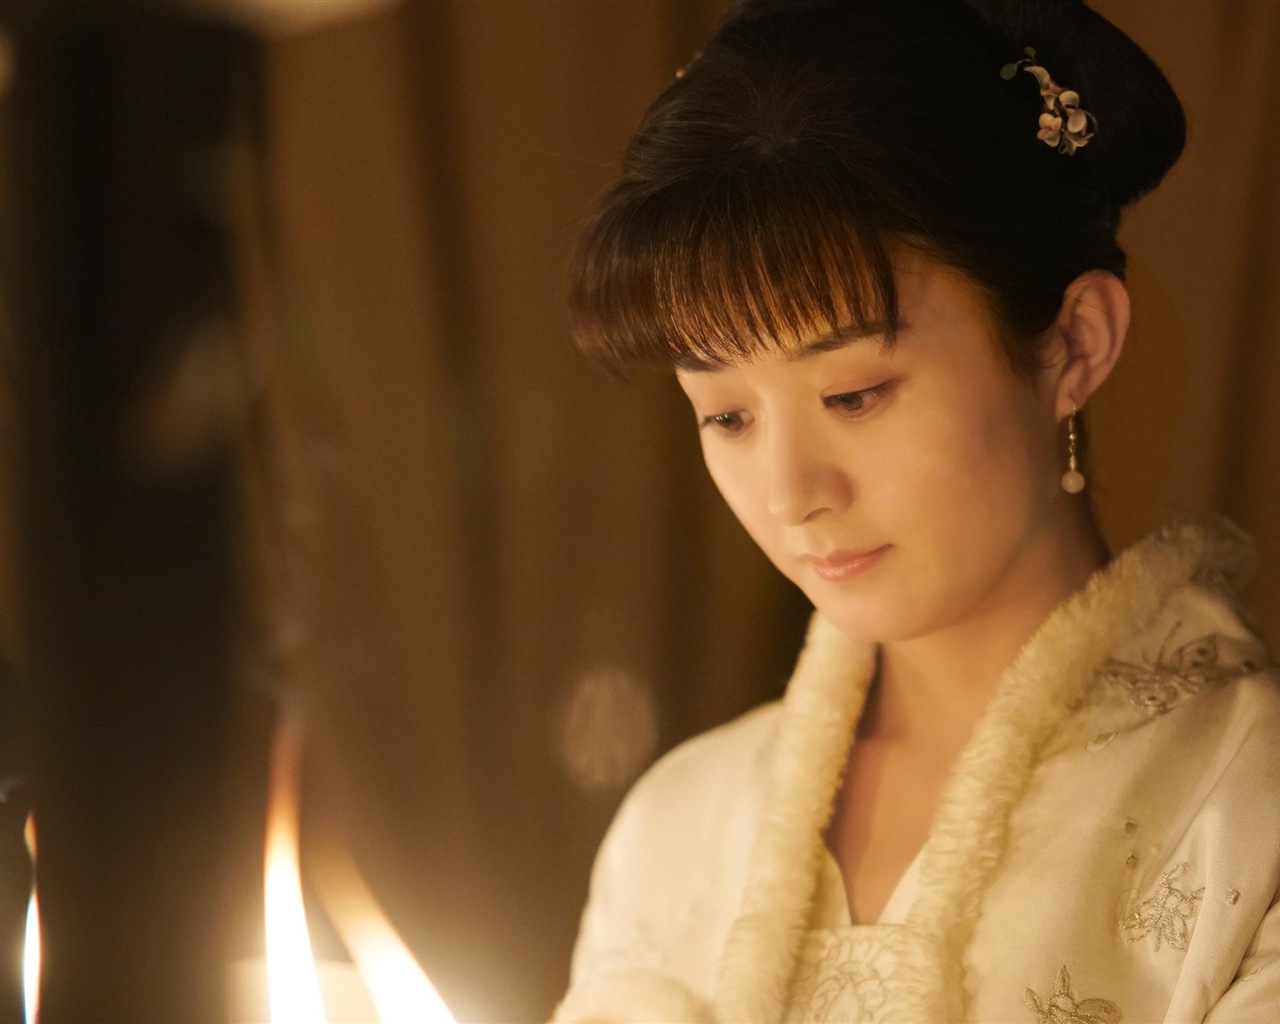 The Story Of MingLan, TV series HD wallpapers #41 - 1280x1024